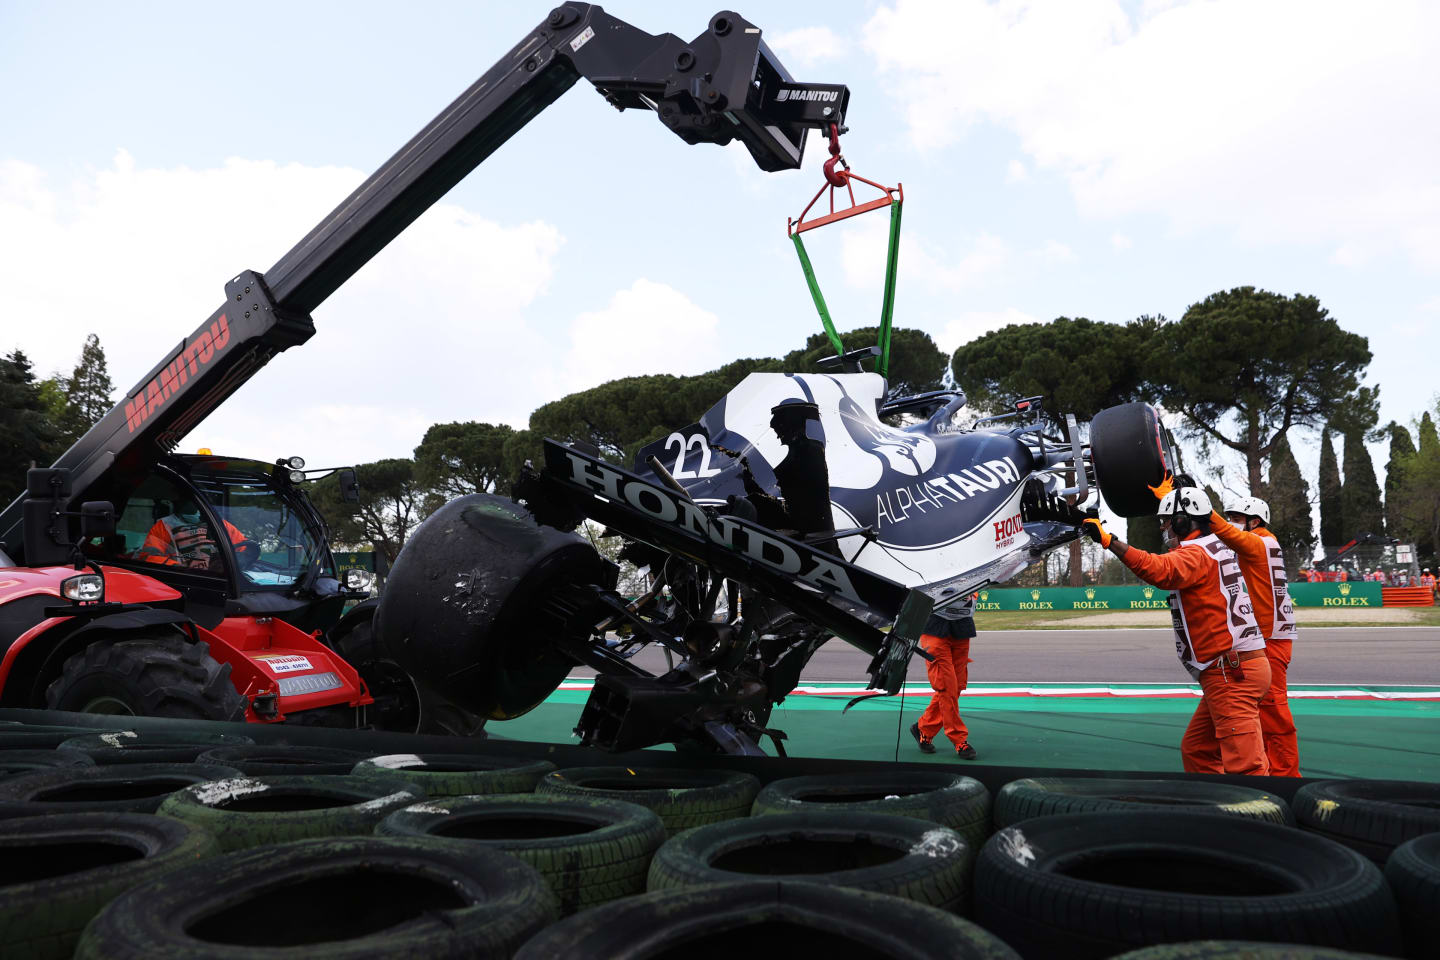 IMOLA, ITALY - APRIL 17: The car of Yuki Tsunoda of Japan and Scuderia AlphaTauri is removed from the circuit after crashing on track during qualifying ahead of the F1 Grand Prix of Emilia Romagna at Autodromo Enzo e Dino Ferrari on April 17, 2021 in Imola, Italy. (Photo by Lars Baron/Getty Images)